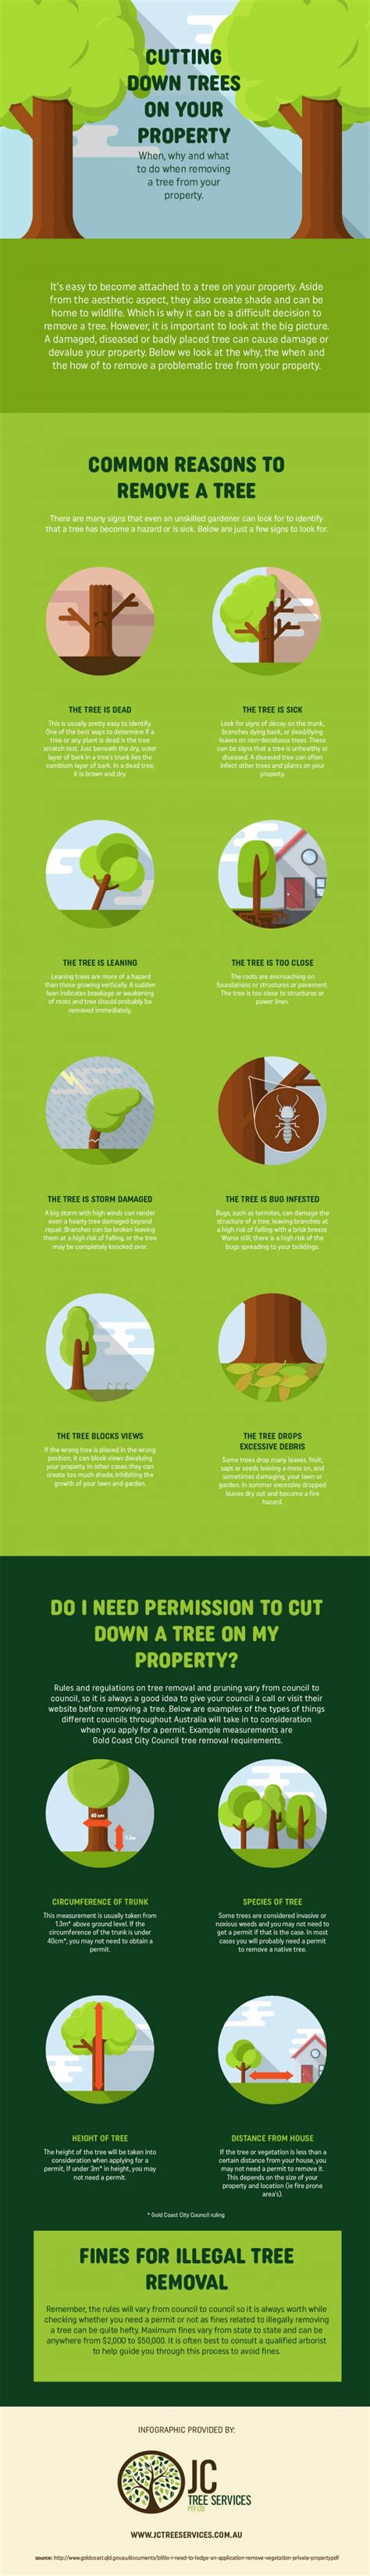 Cutting down trees on your property? Read this first! (infographic)